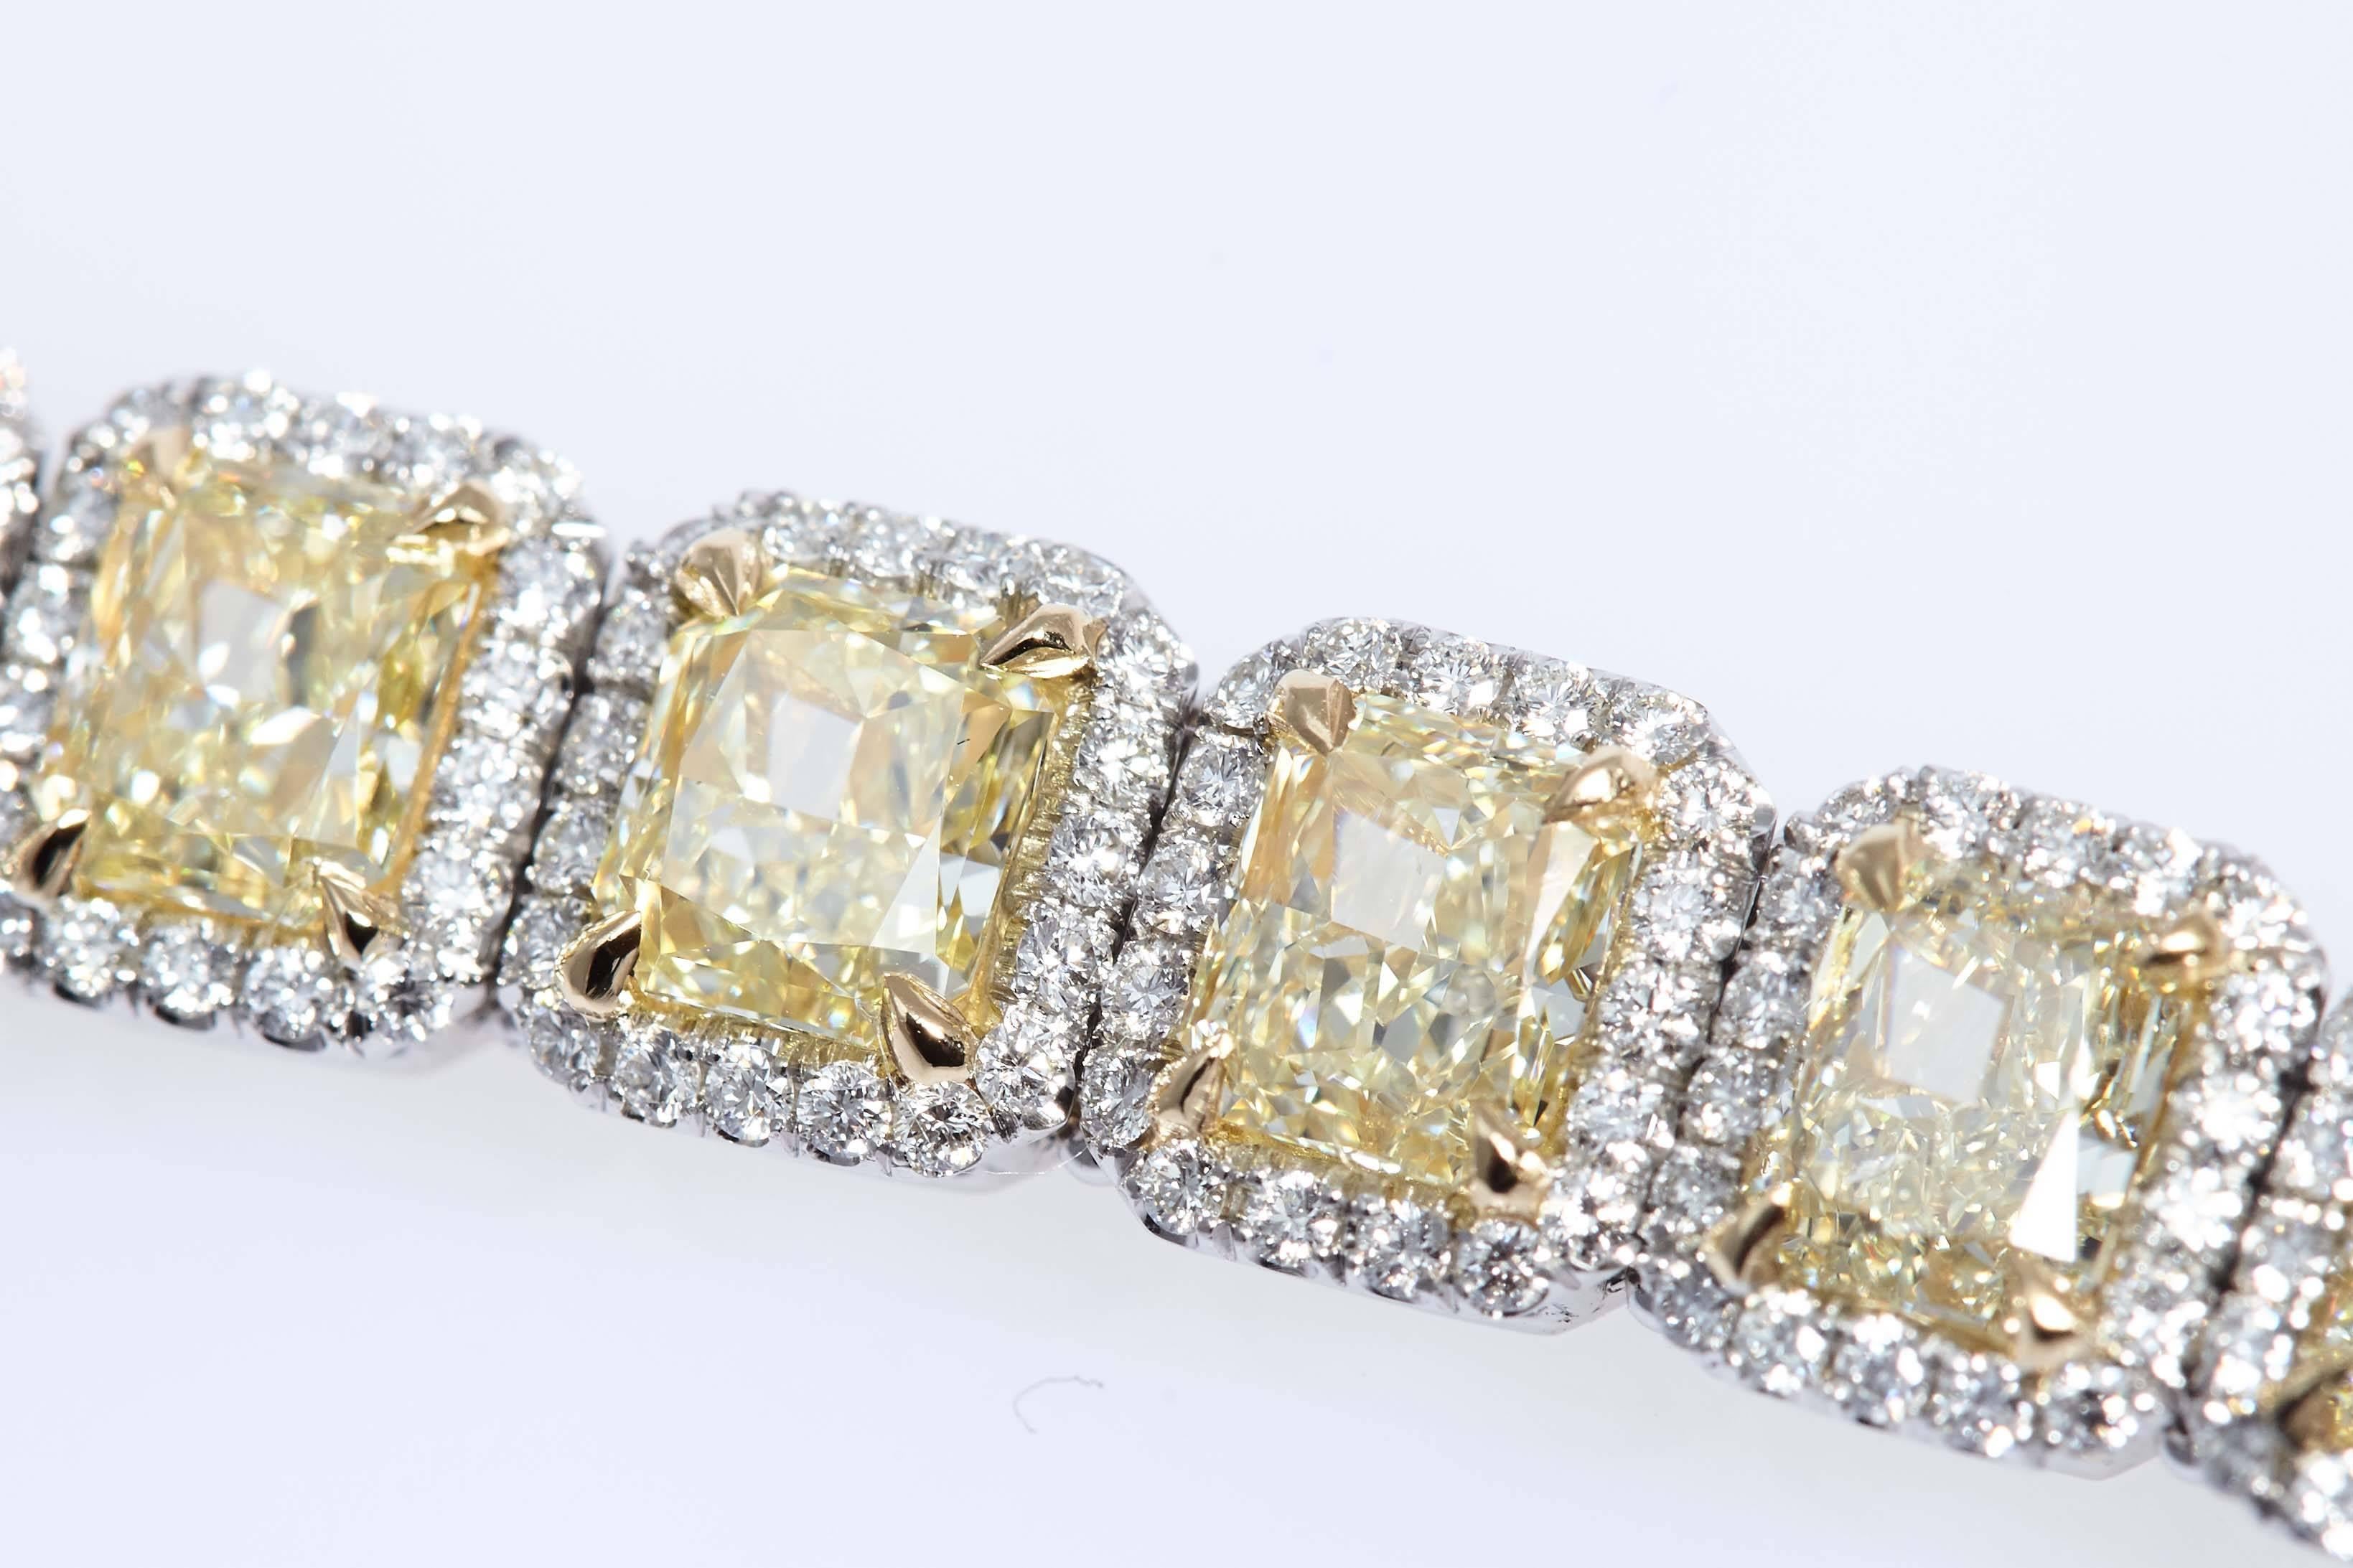 Custom made platinum and 18 karat yellow gold bracelet made up of 21 yellow radiant cut diamonds with a total weight of 24.67 carats and 406 round diamonds with a total weight of 3.50 carats.  The bracelet measures 7 inches in length.